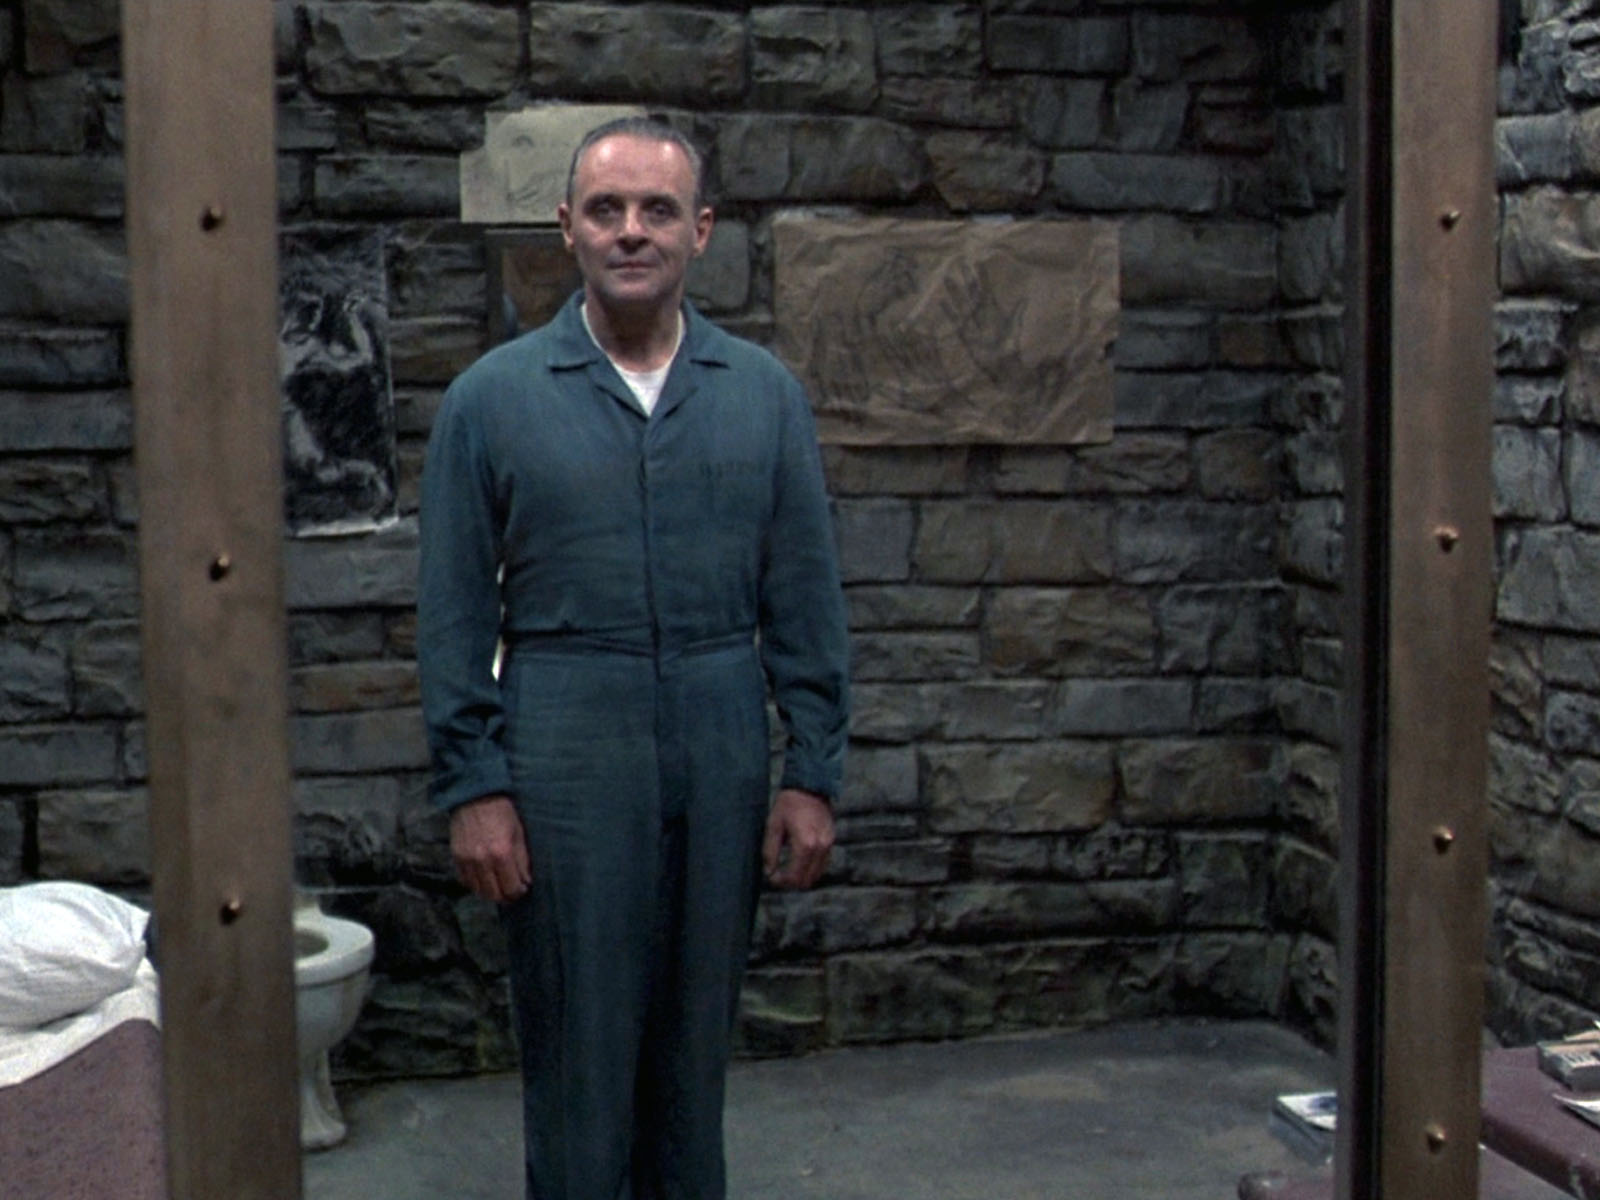 Hannibal Lecter (Anthony Hopkins) in his cell in The Silence of the Lambs (1991)